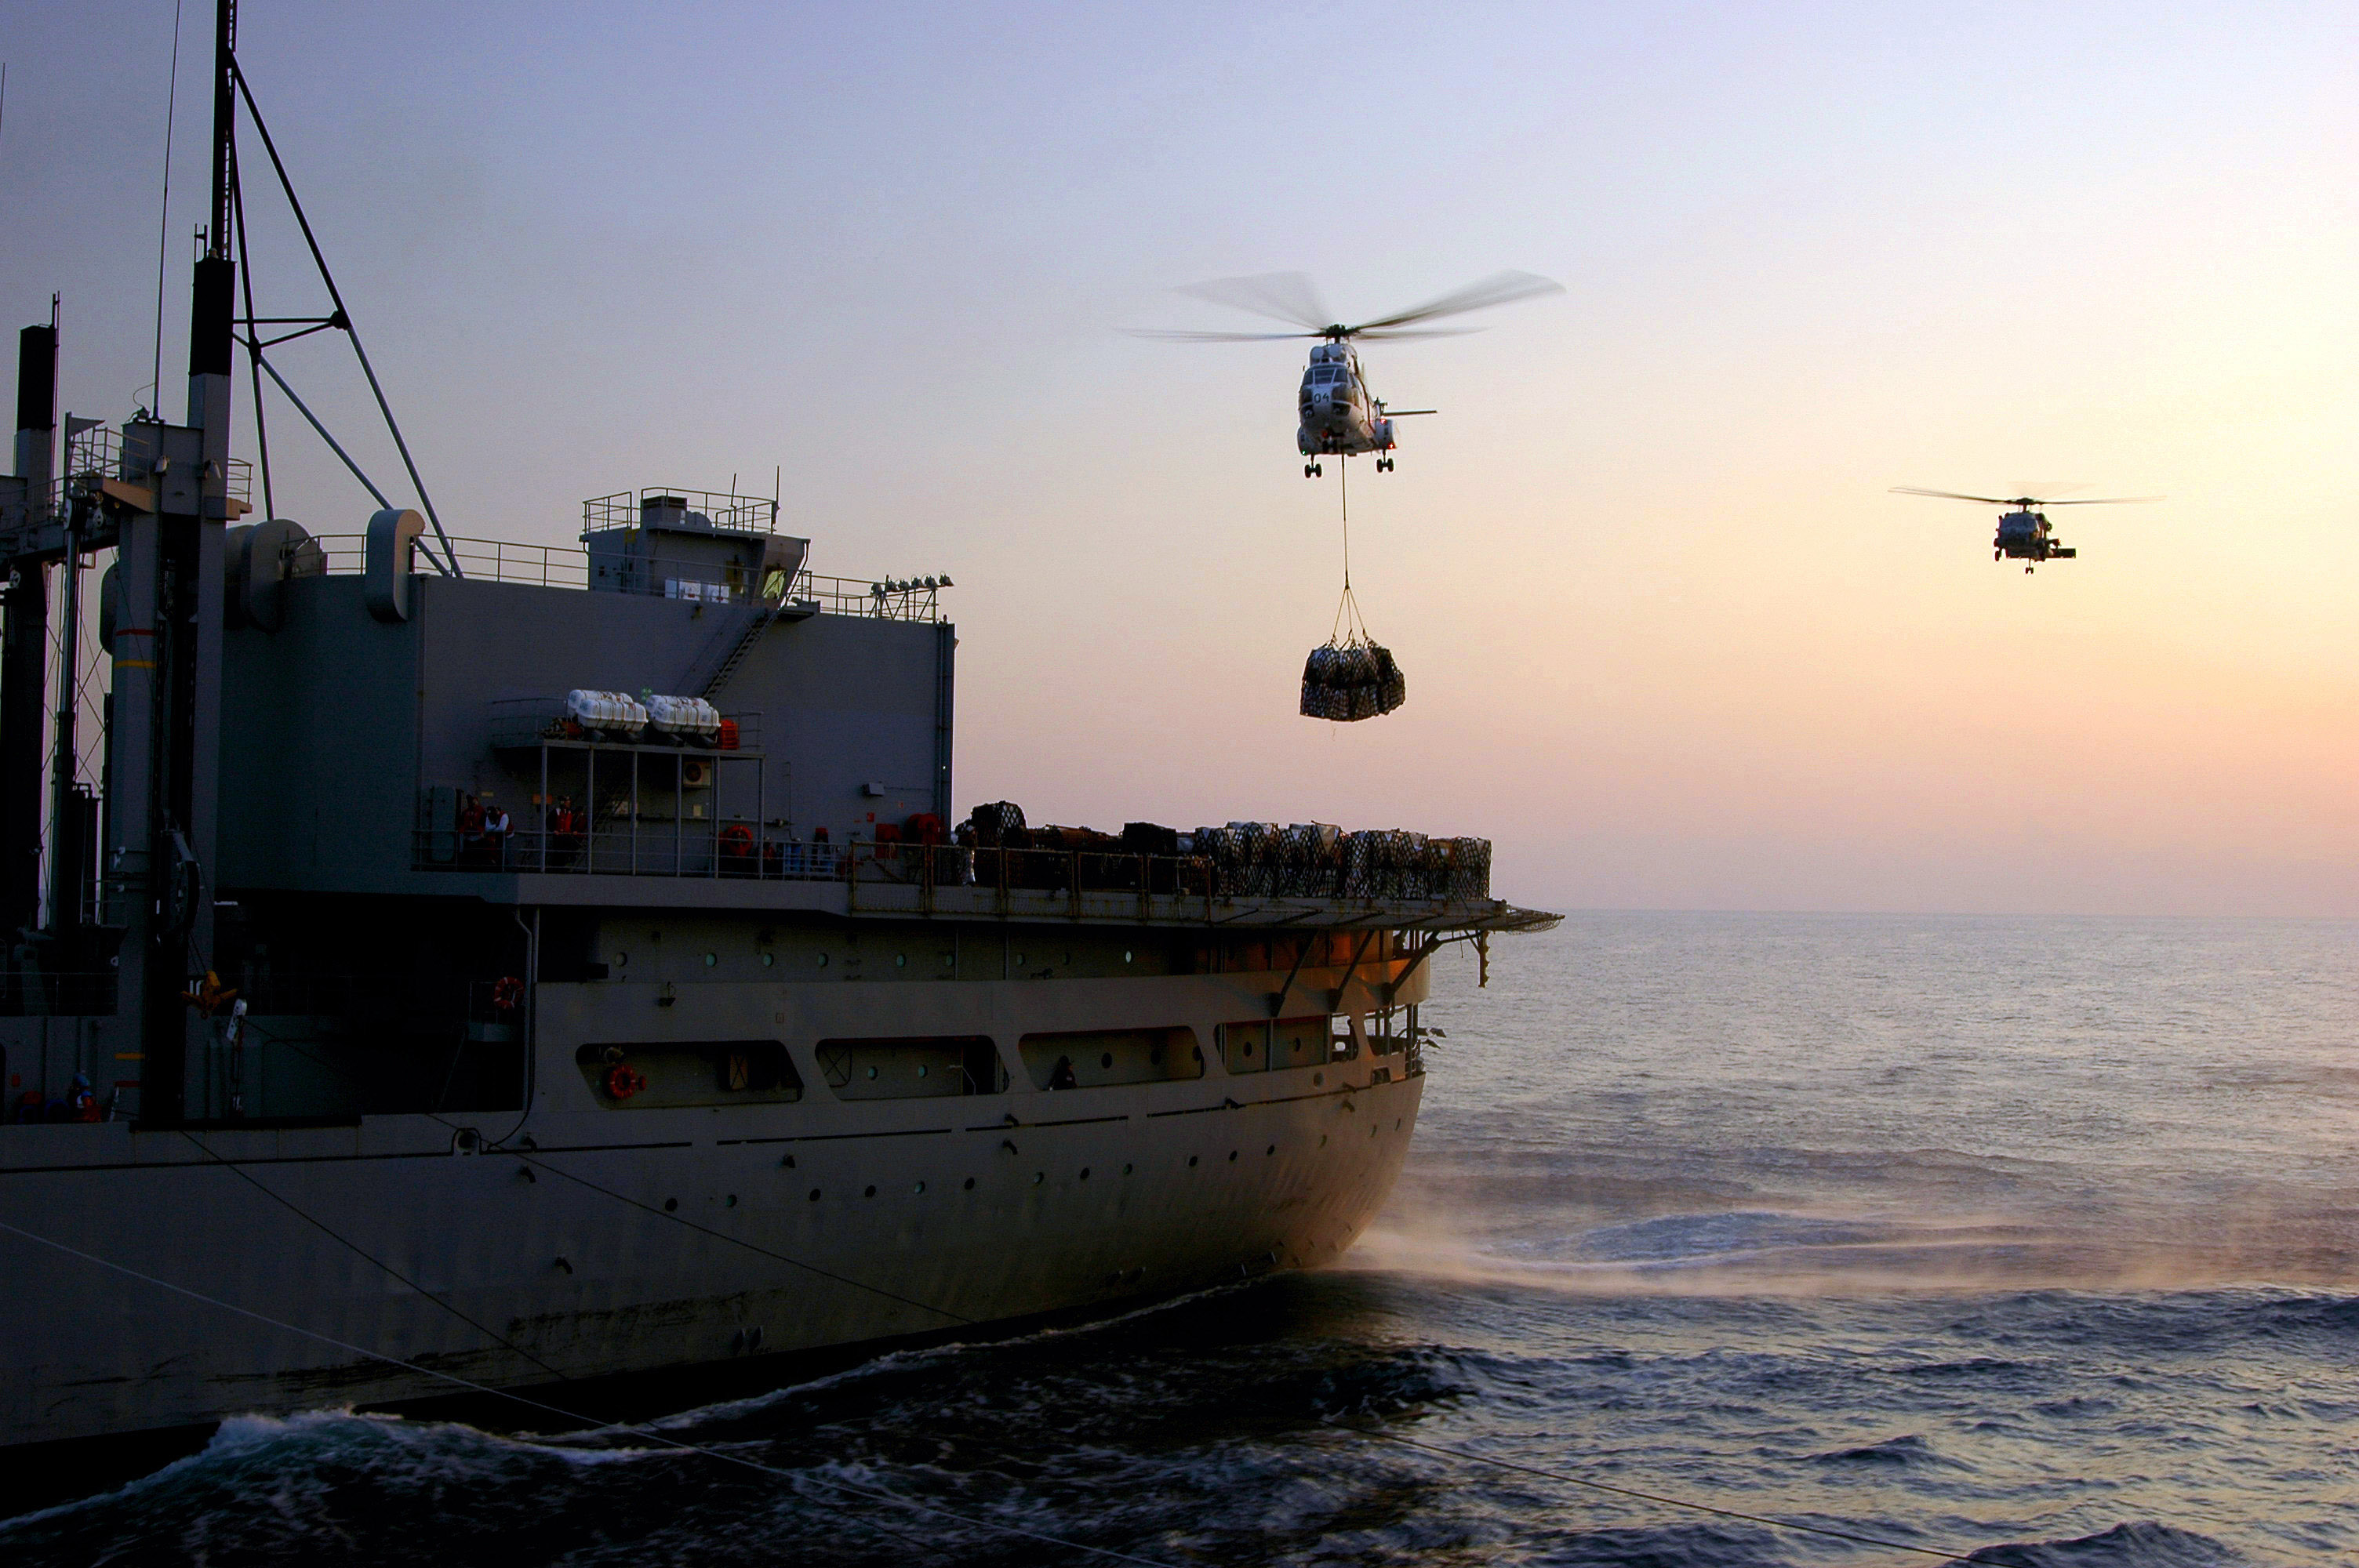 US Navy 061130-N-0490C-004 An SA-330 Puma helicopter assigned to Military Sealift Command (MSC) combat stores ship USNS Spica (T-AFS 9) moves supplies during a vertical replenishment (VERTREP)